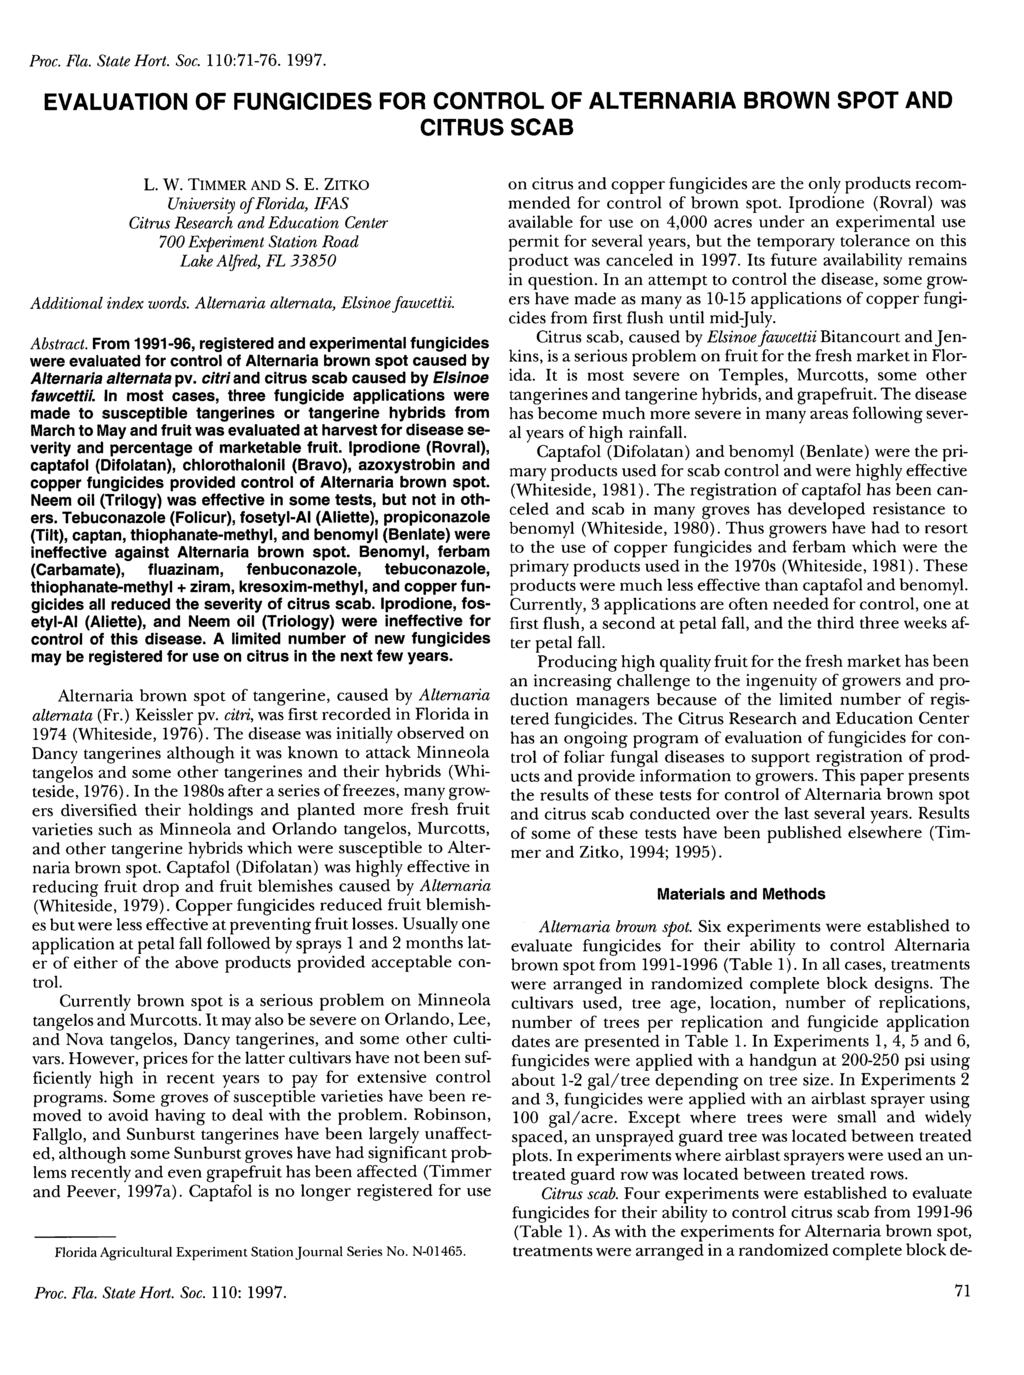 Proc. Fla. State Hort. Soc. 110:71-76. 1997. EVALUATION OF FUNGICIDES FOR CONTROL OF ALTERNARIA BROWN SPOT AND CITRUS SCAB L. W. TlMMER AND S. E. ZlTKO University of Florida, IFAS Citrus Research and Education Center 700 Experiment Station Road Lake Alfred, FL 33850 Additional index words.